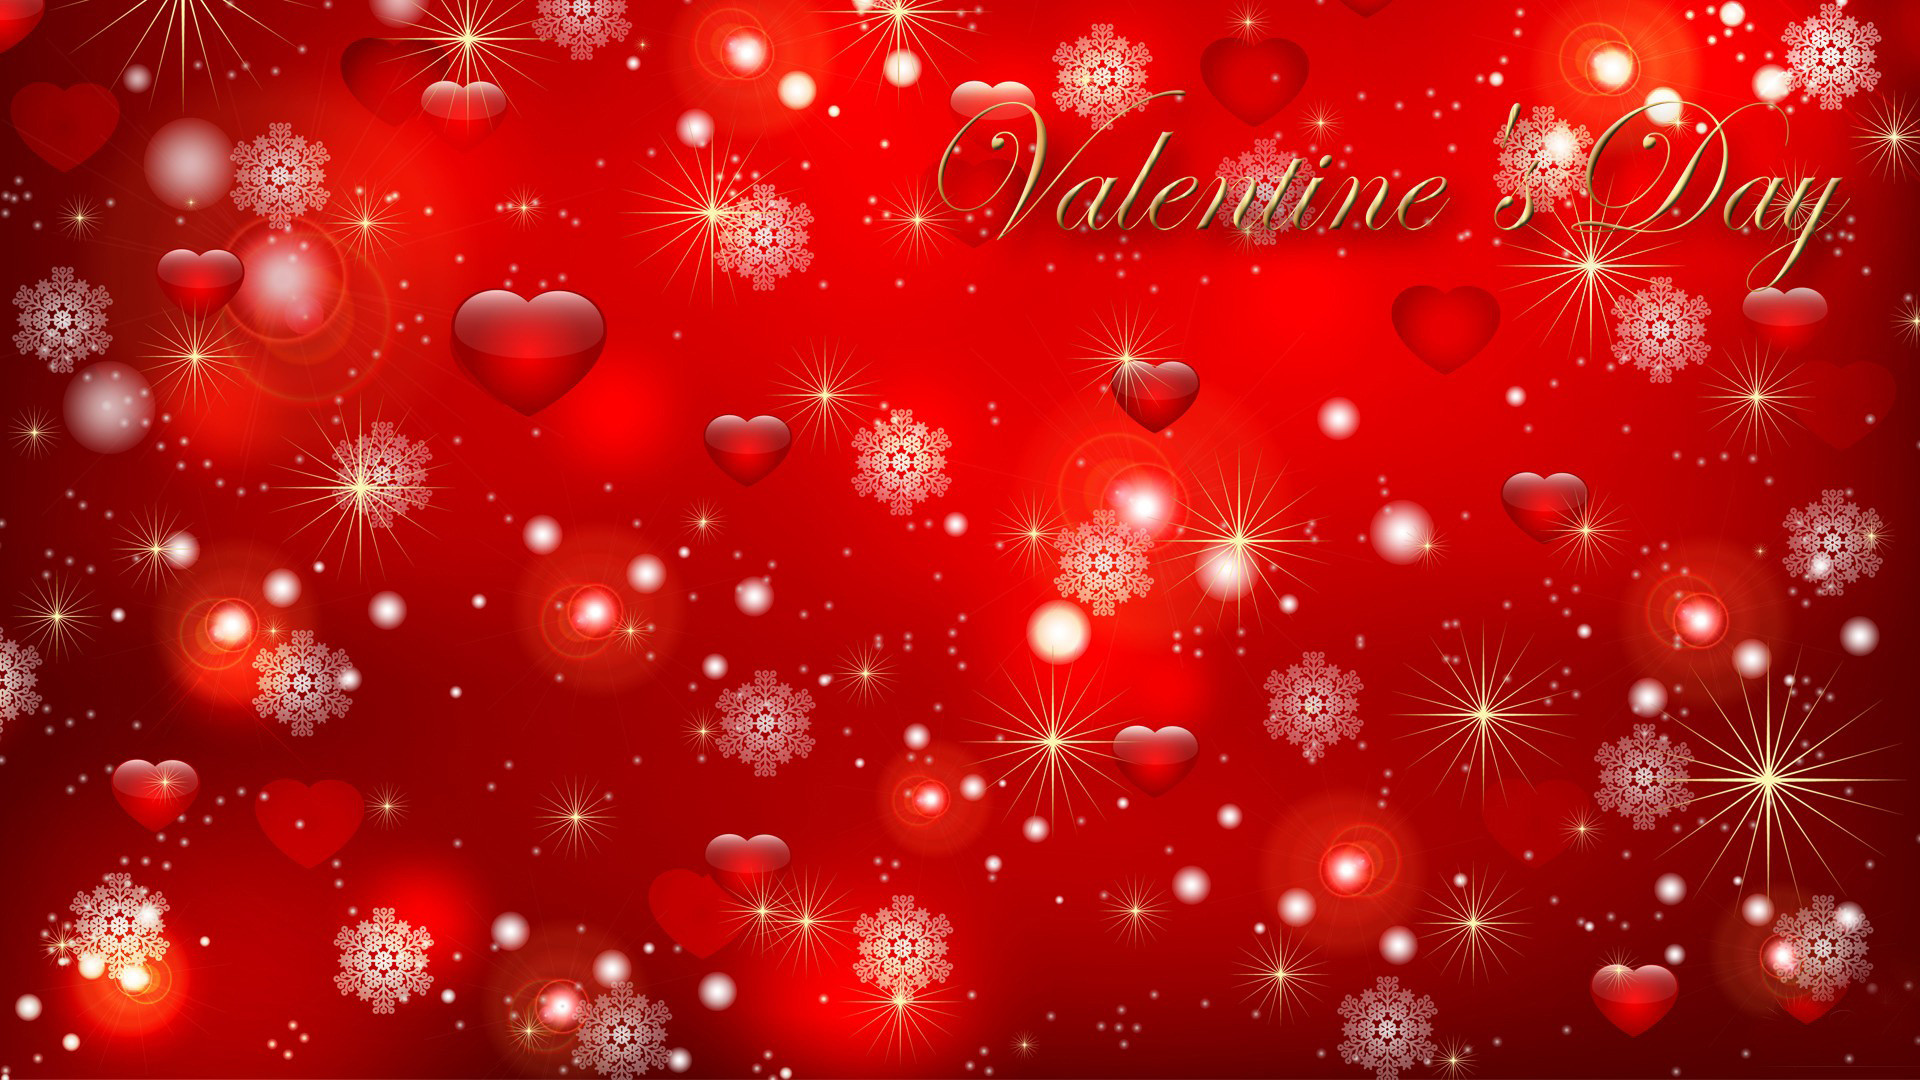 1920x1080 ... wallpaper free download; valentine day 2017 images pictures wallpapers  free download ...